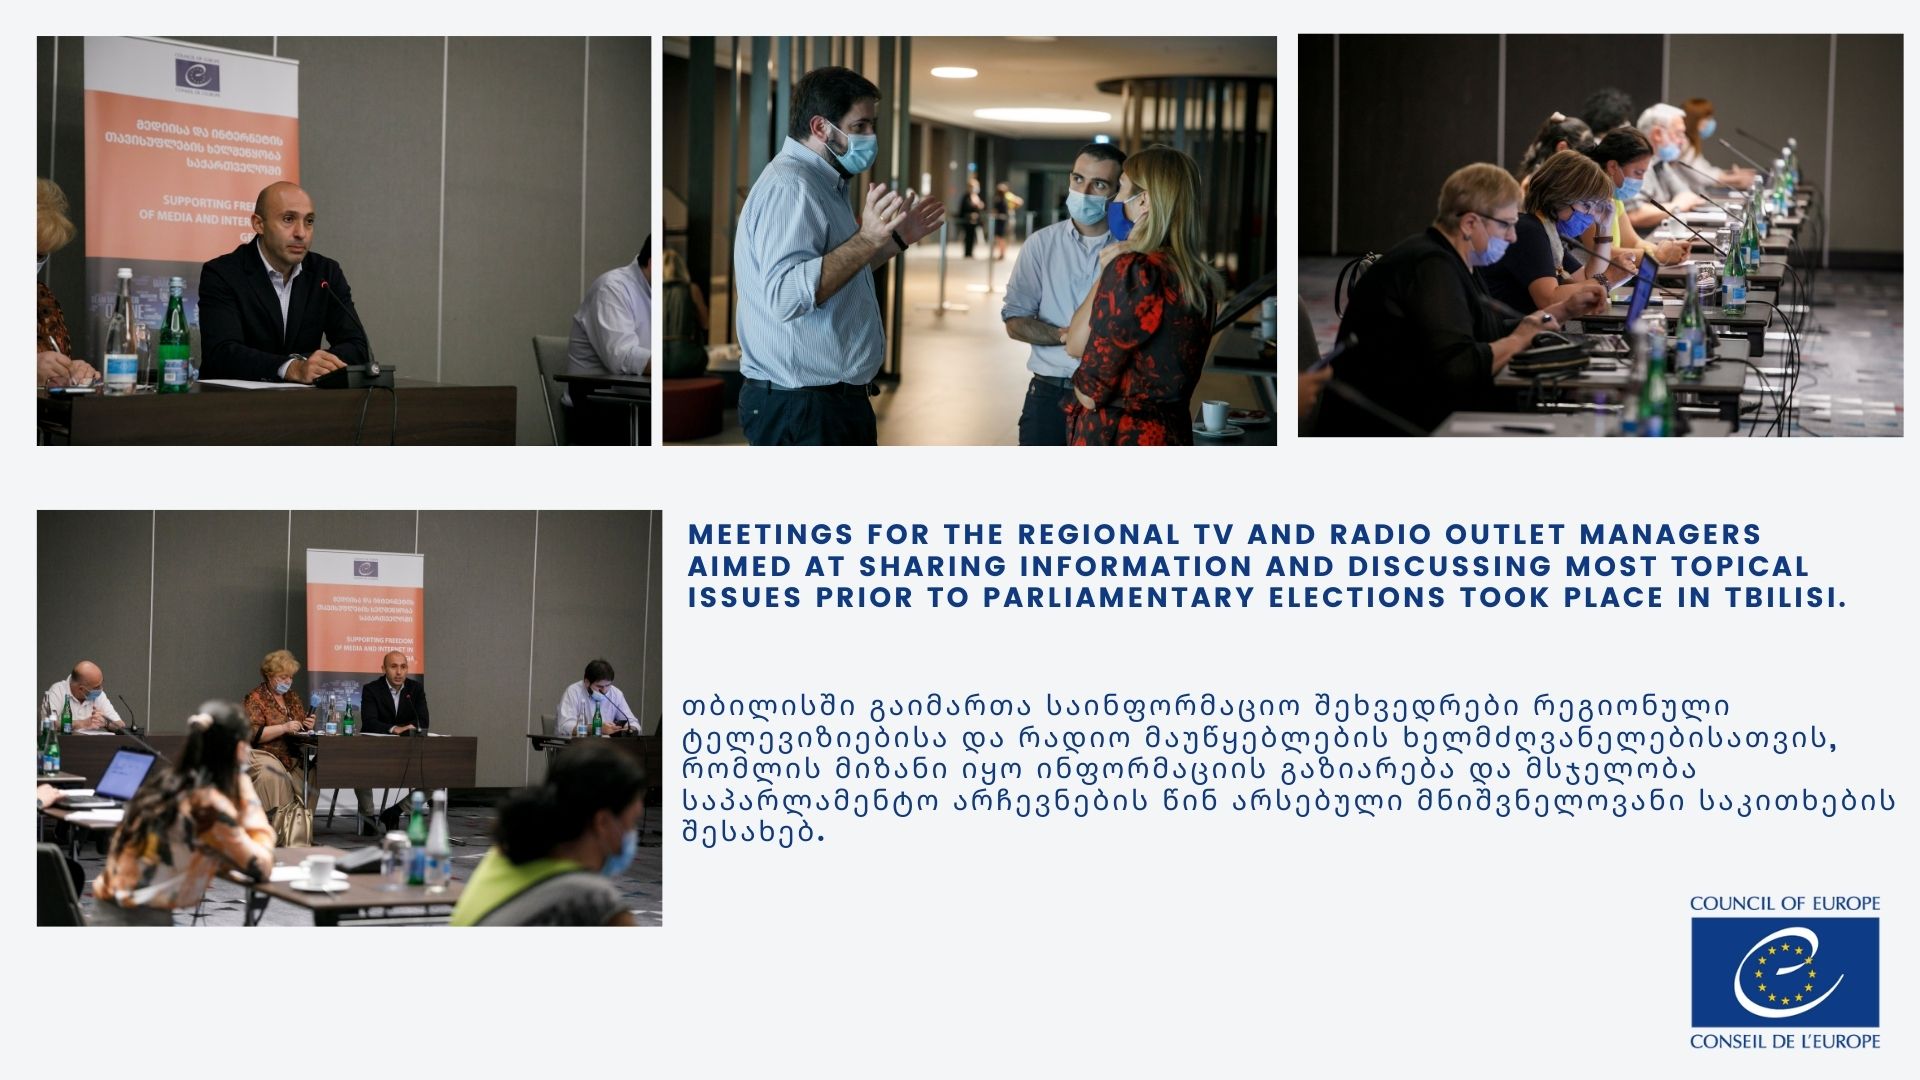 Information meetings for regional TV and radio managers